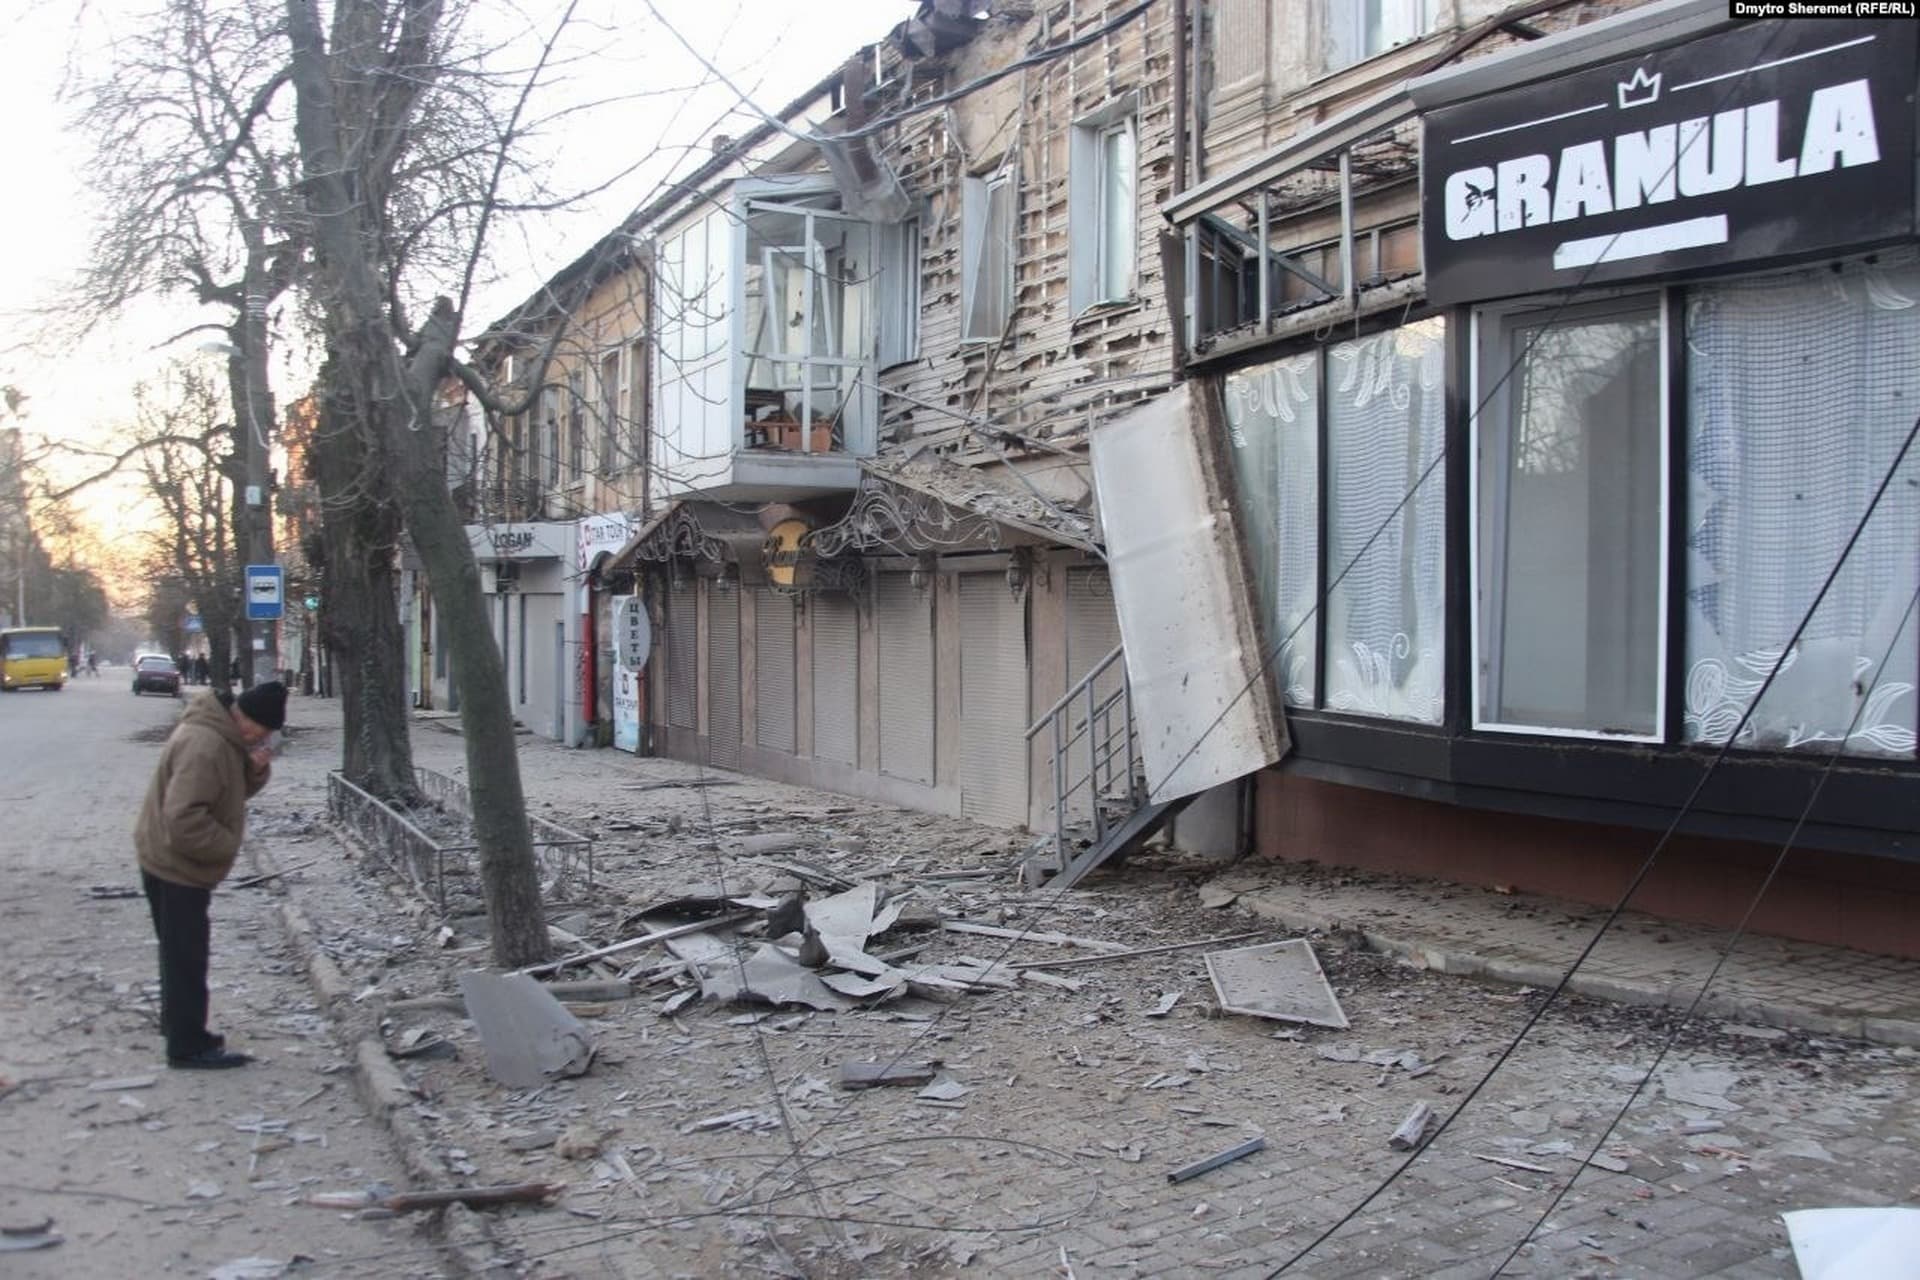 A man looks at the debris of shopfronts damaged in Russian shelling on the night of December 28